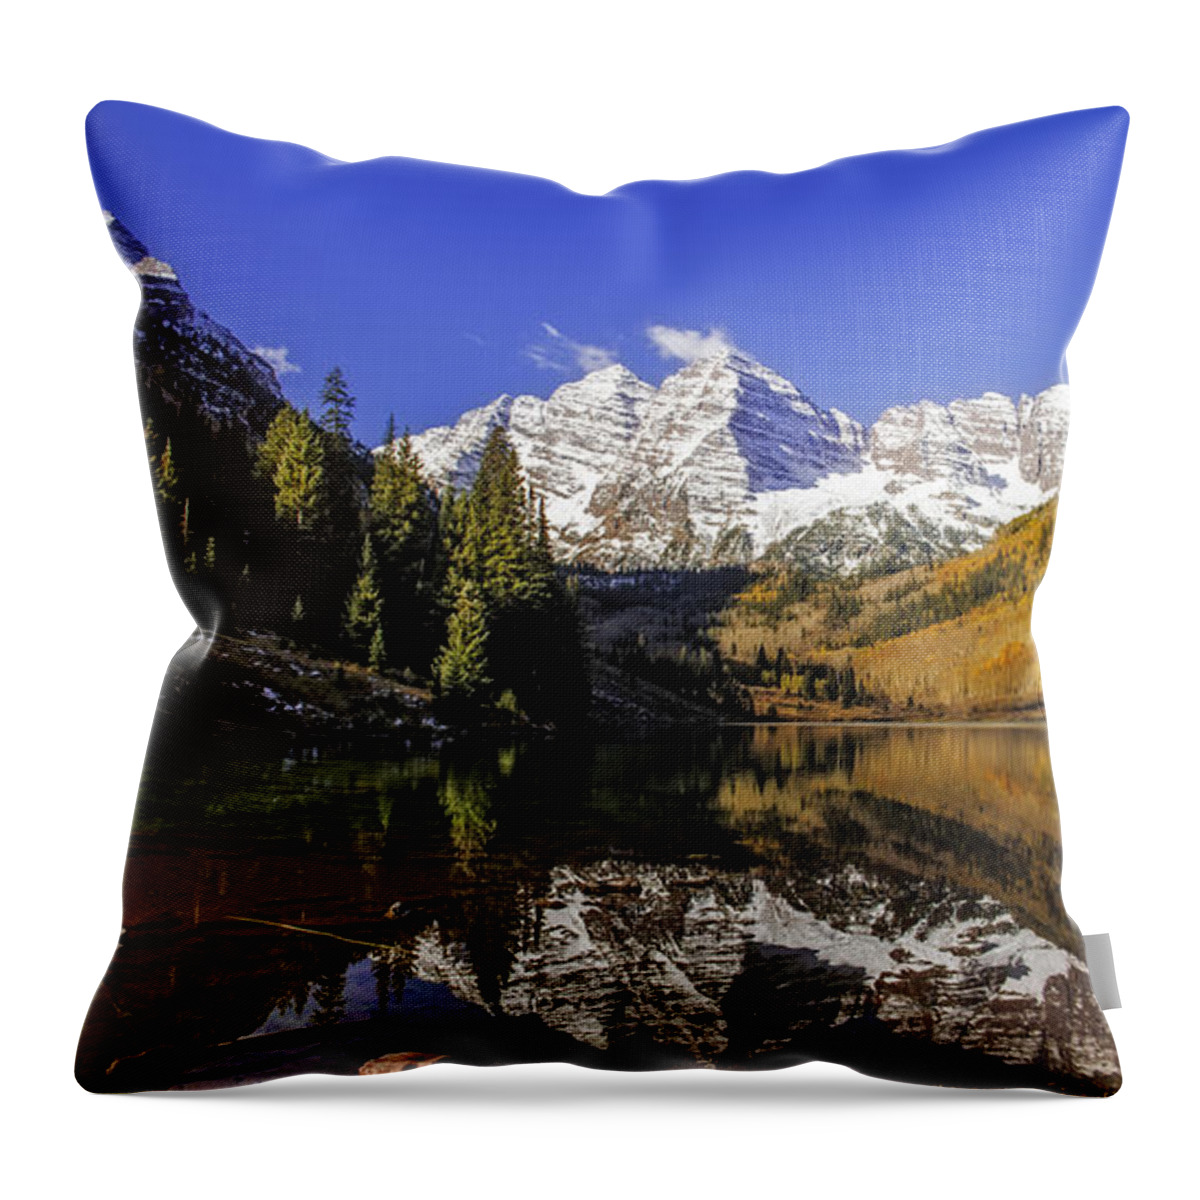 Aspen Colorado Throw Pillow featuring the photograph Maroon Bells Panorama by Teri Virbickis